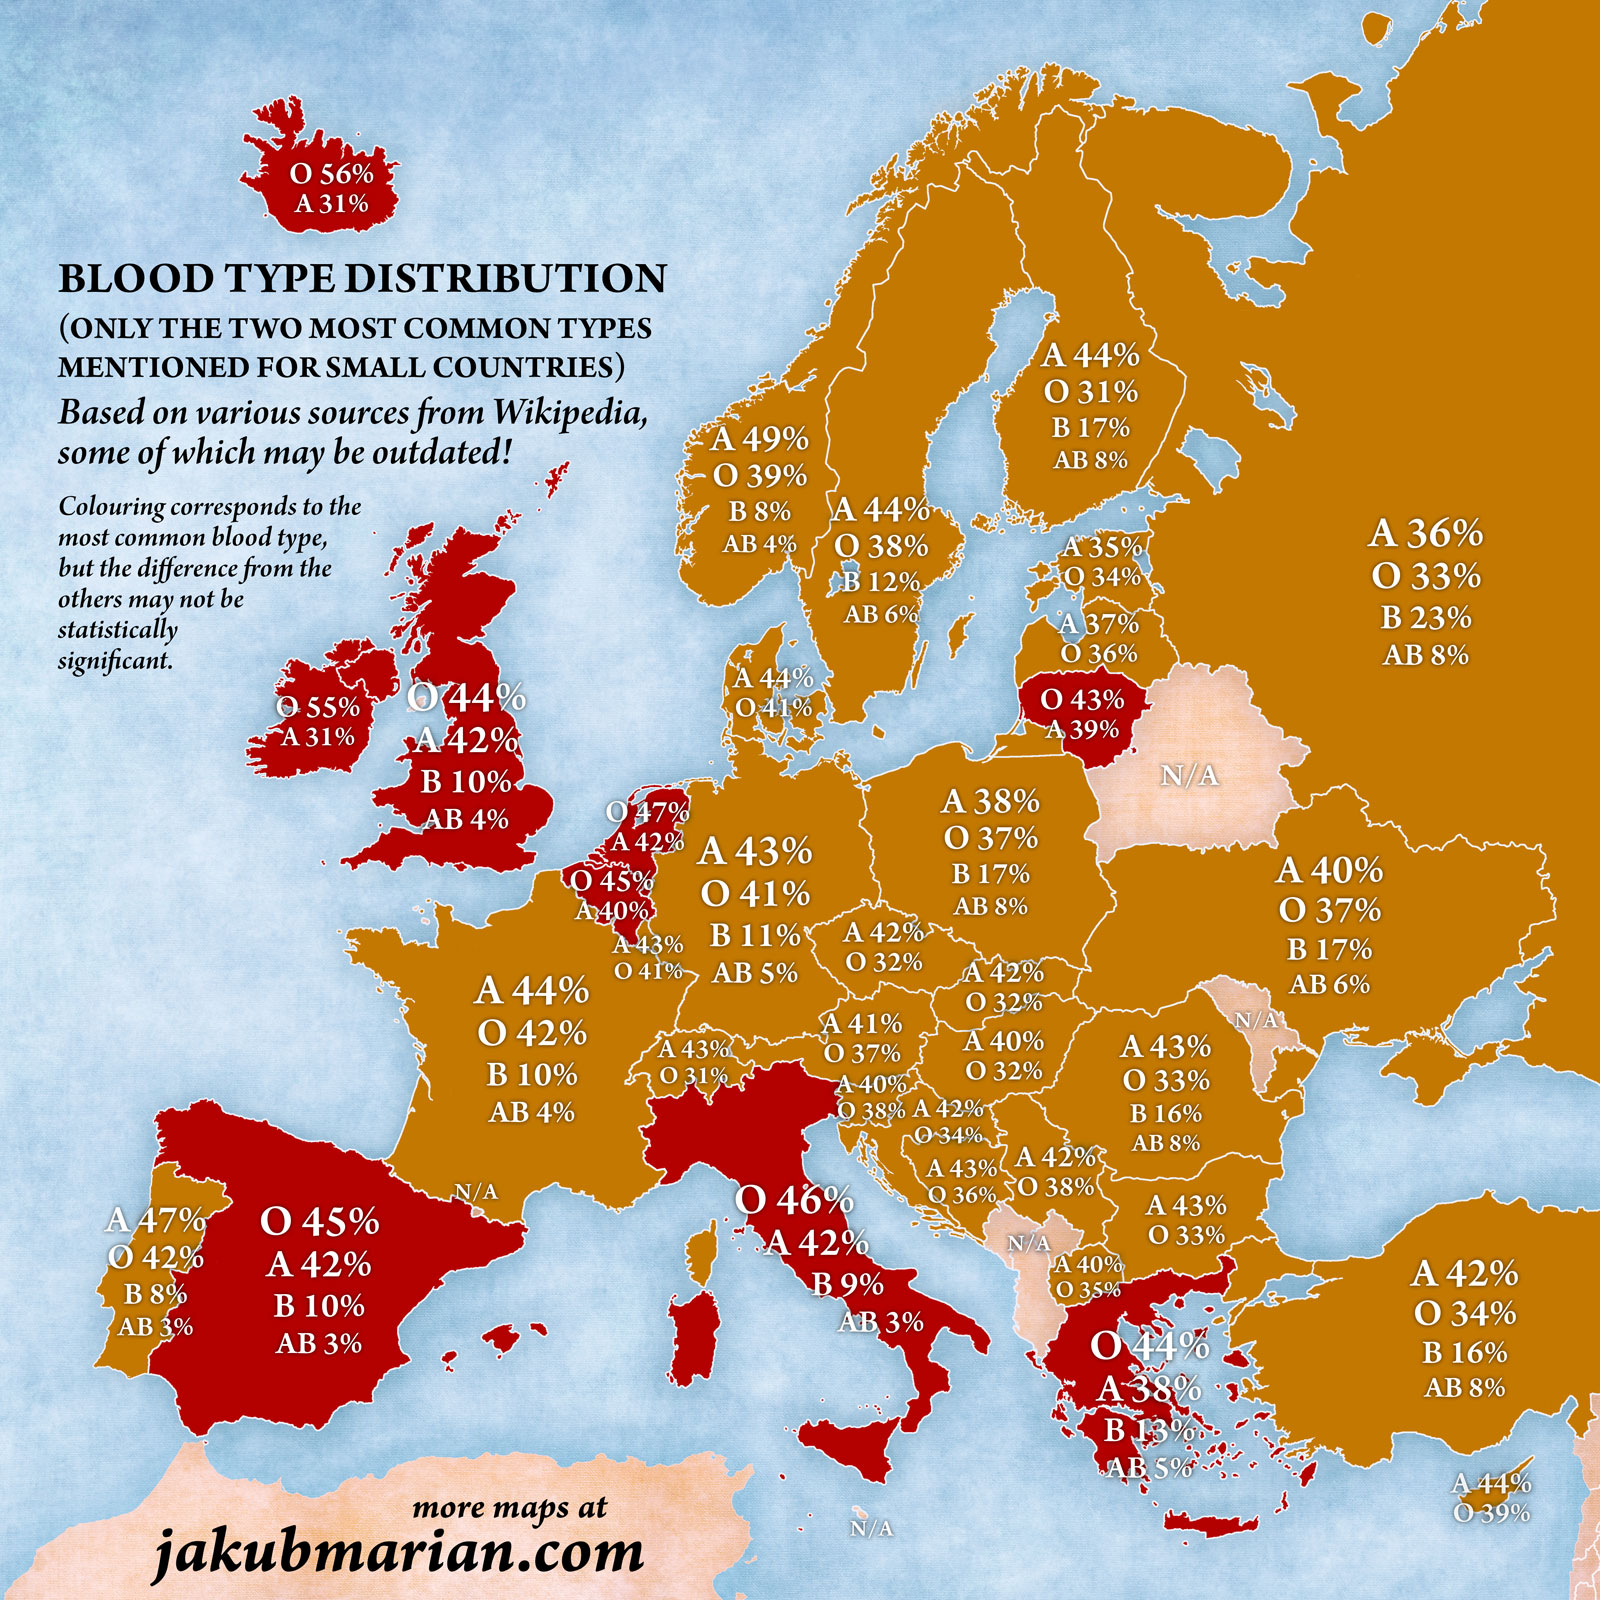 Blood type in Europe